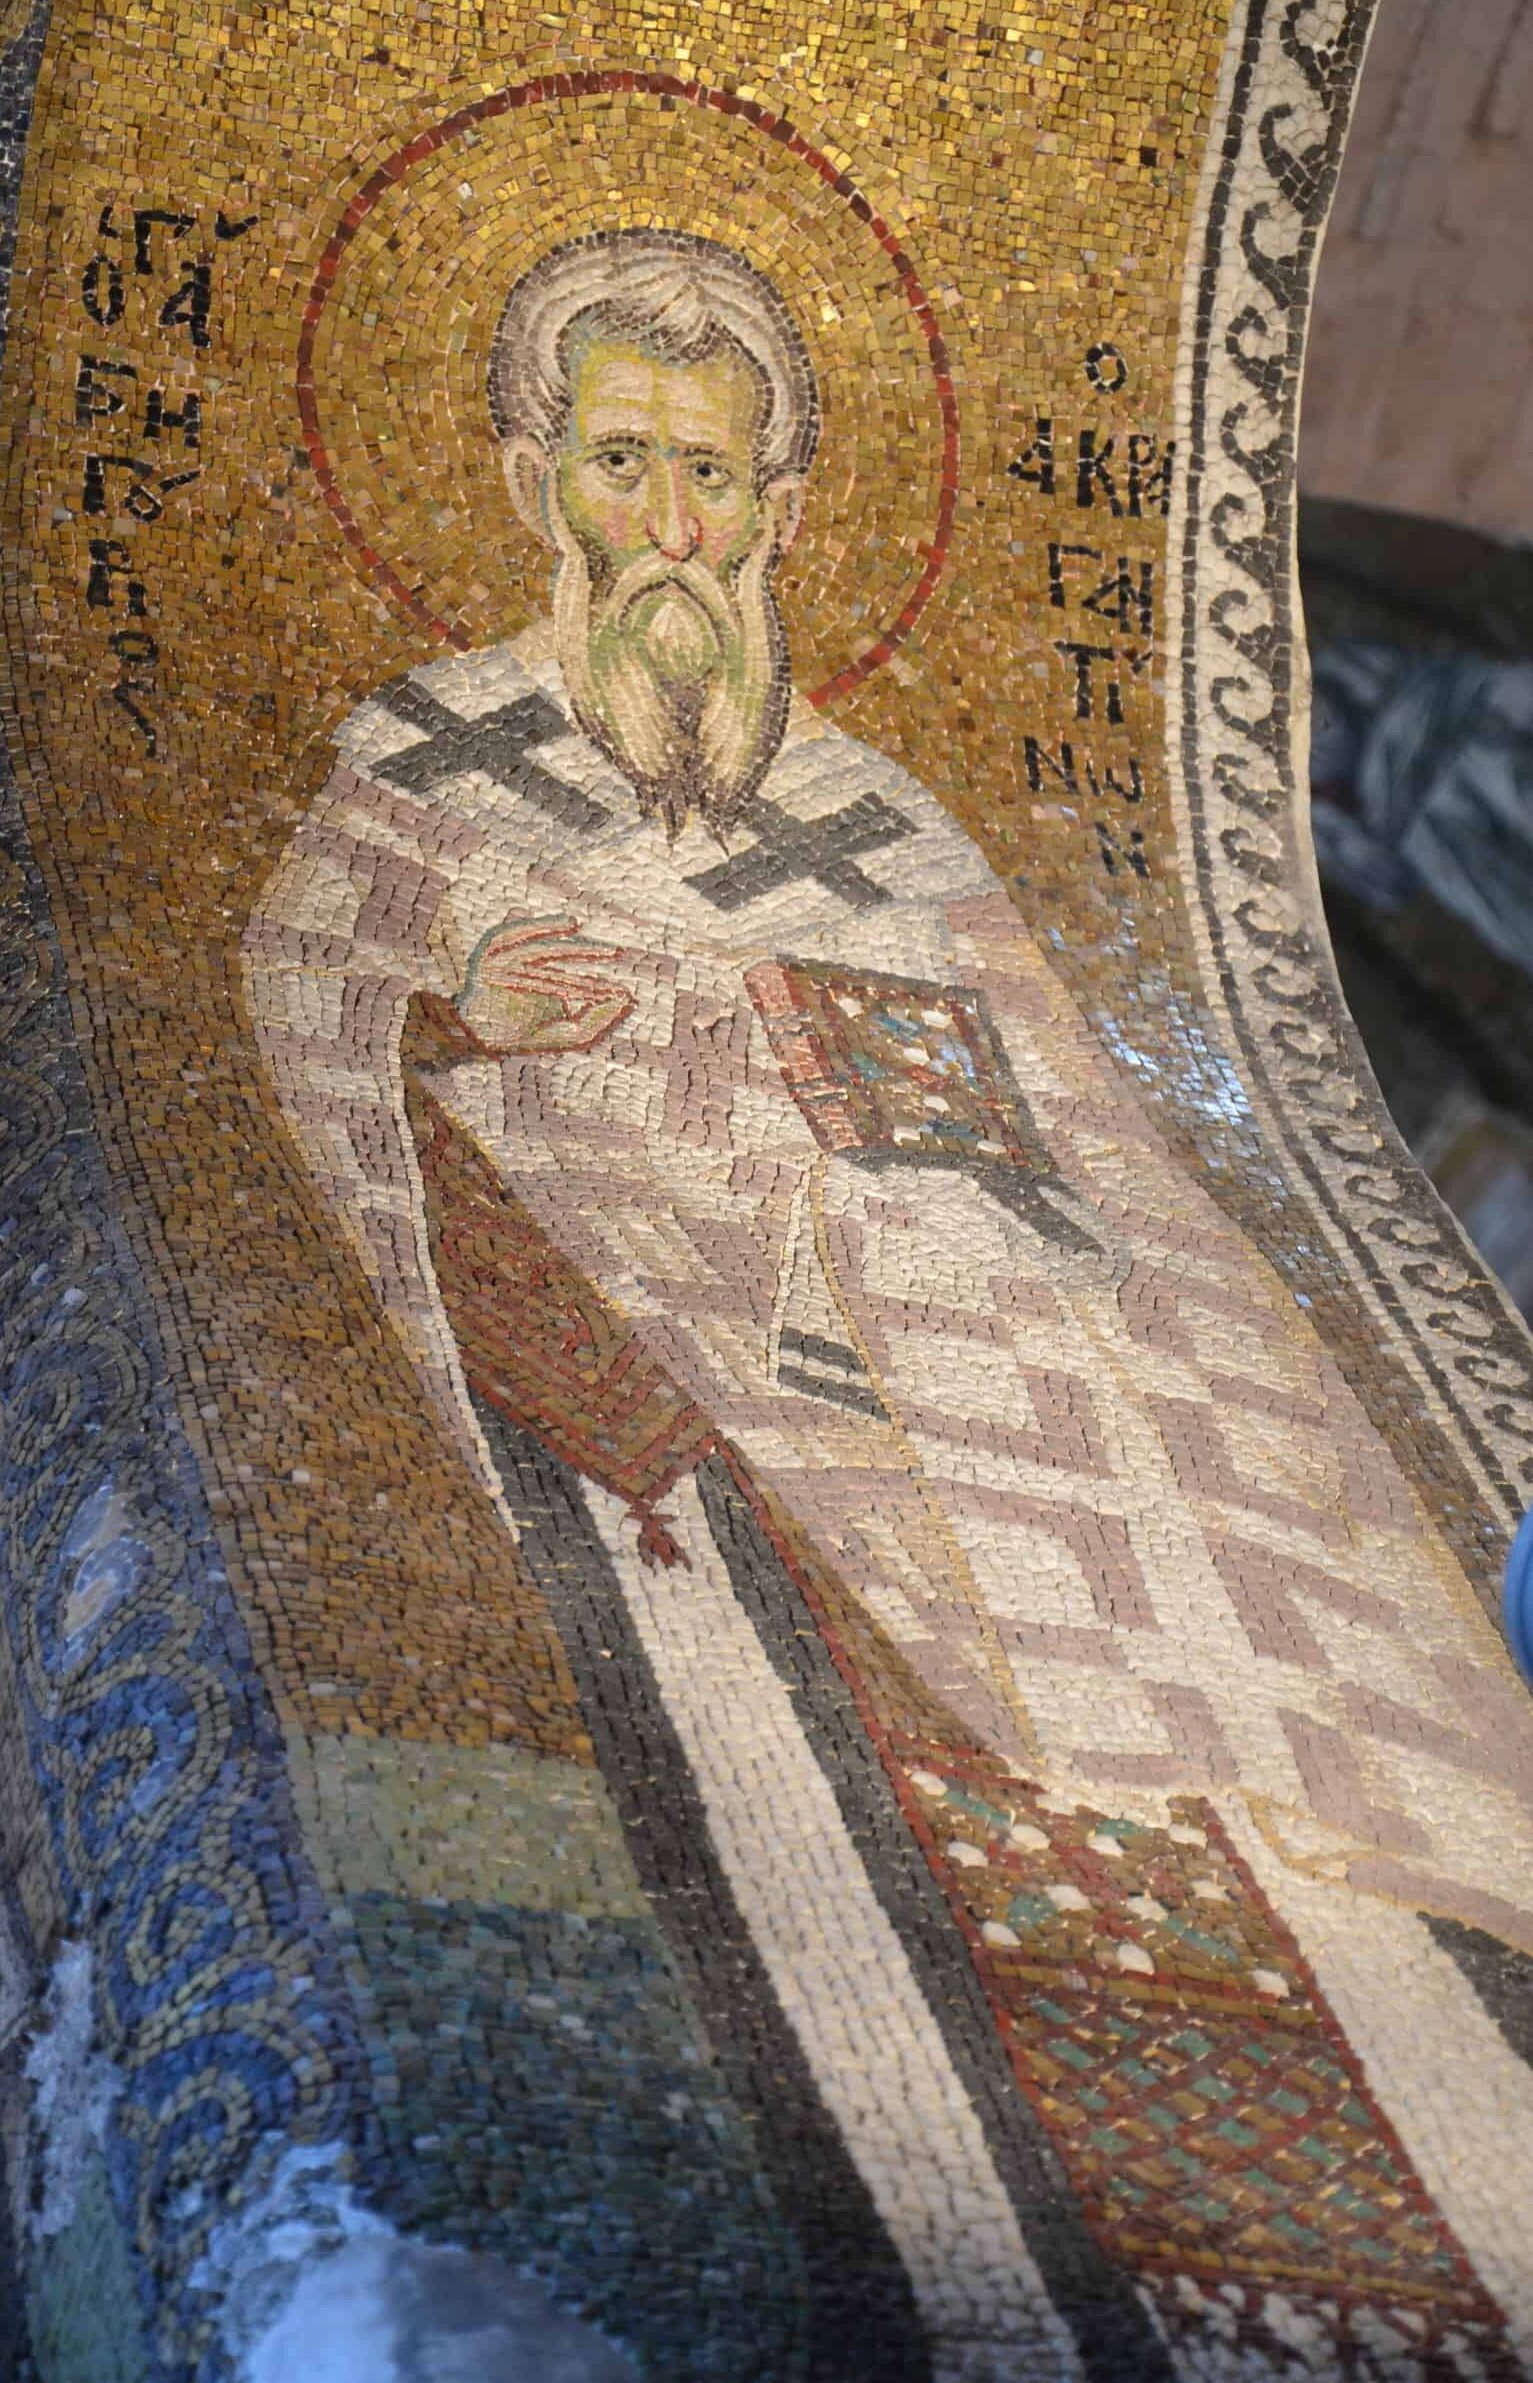 St. Gregory of Agrigentum at the Pammakaristos Church in Istanbul, Turkey